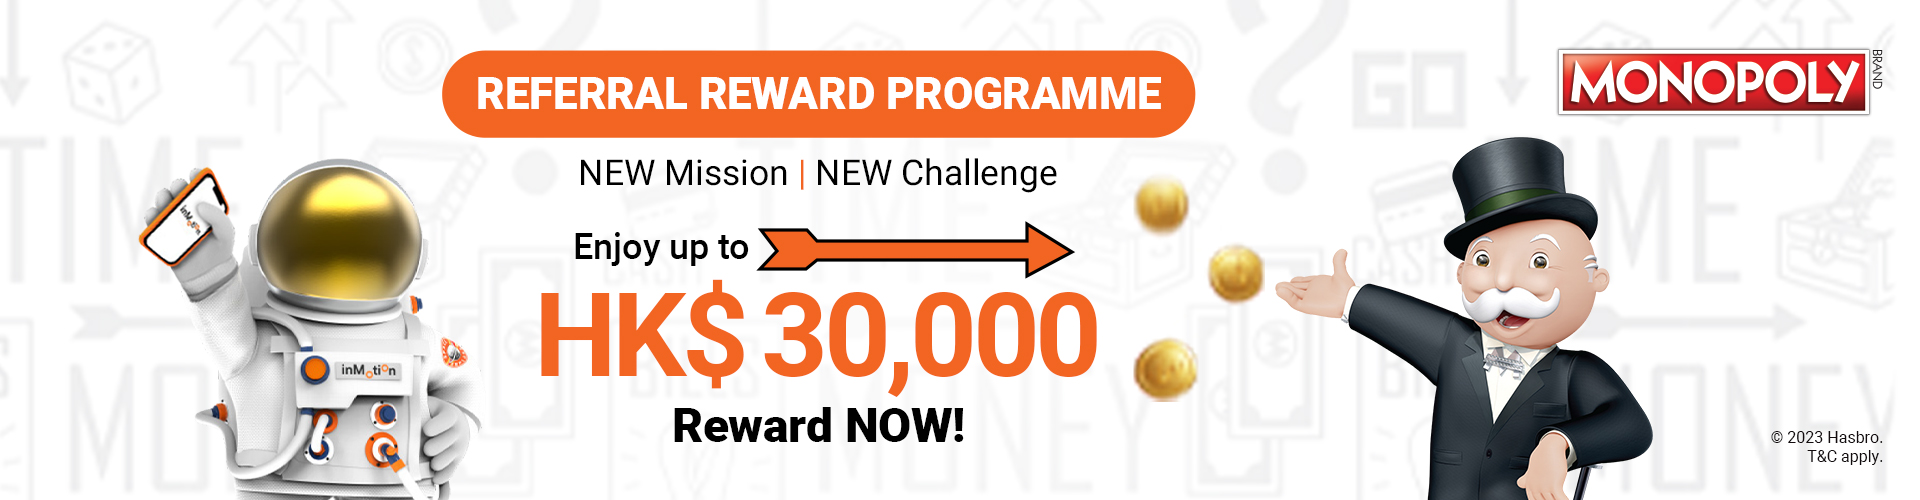 Referral Reward Programme – Up to HK$3,000 upon 10 successful inMotion account opening referrals